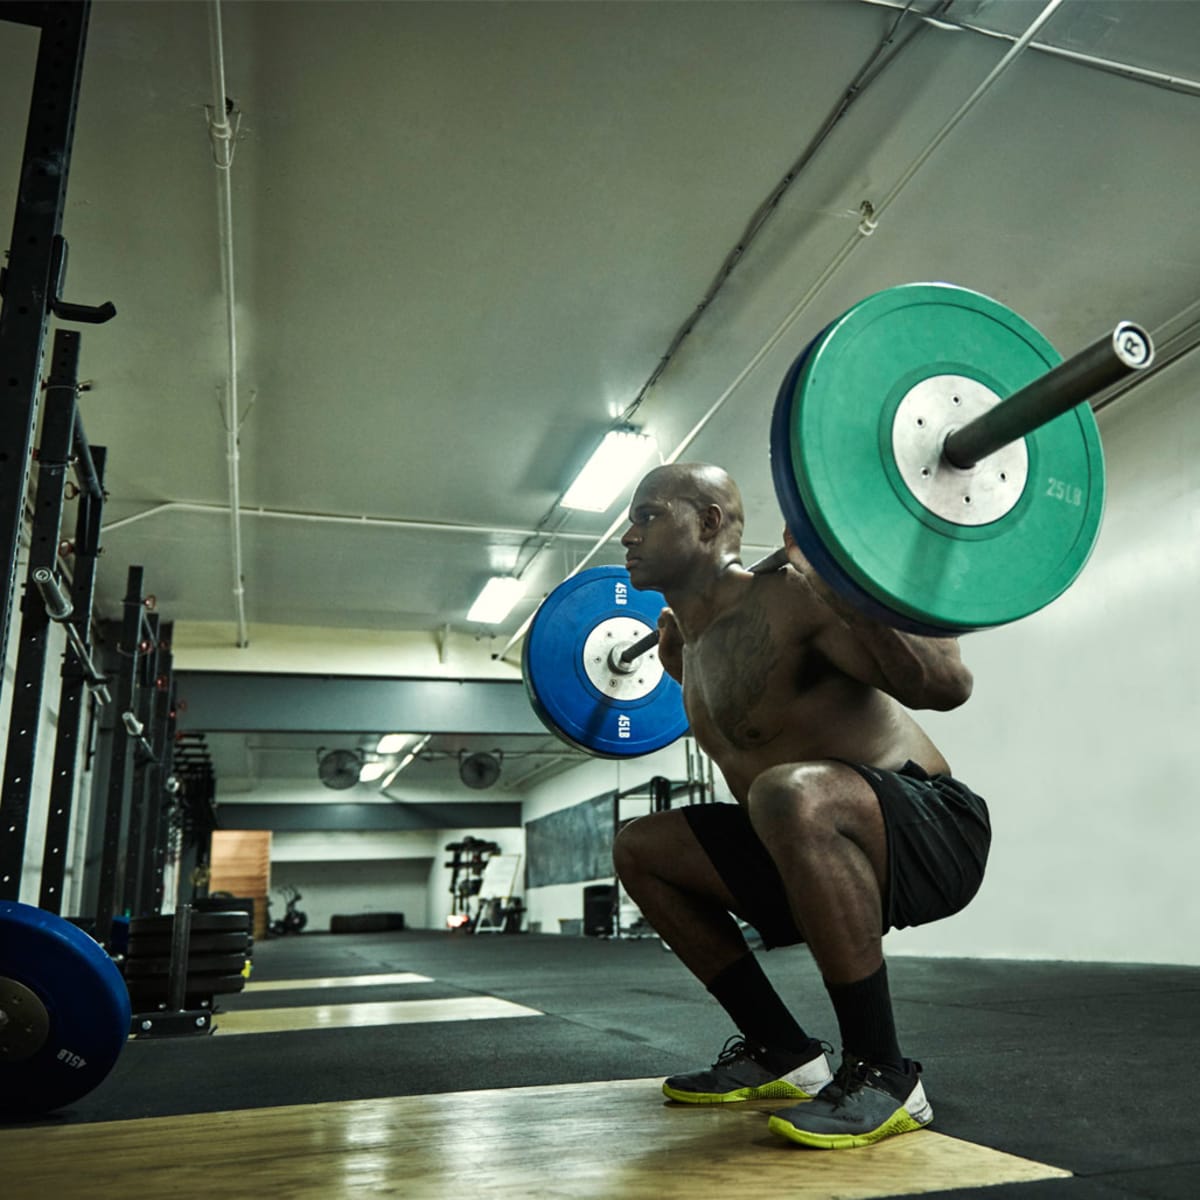 How to diversify your Squat exercise